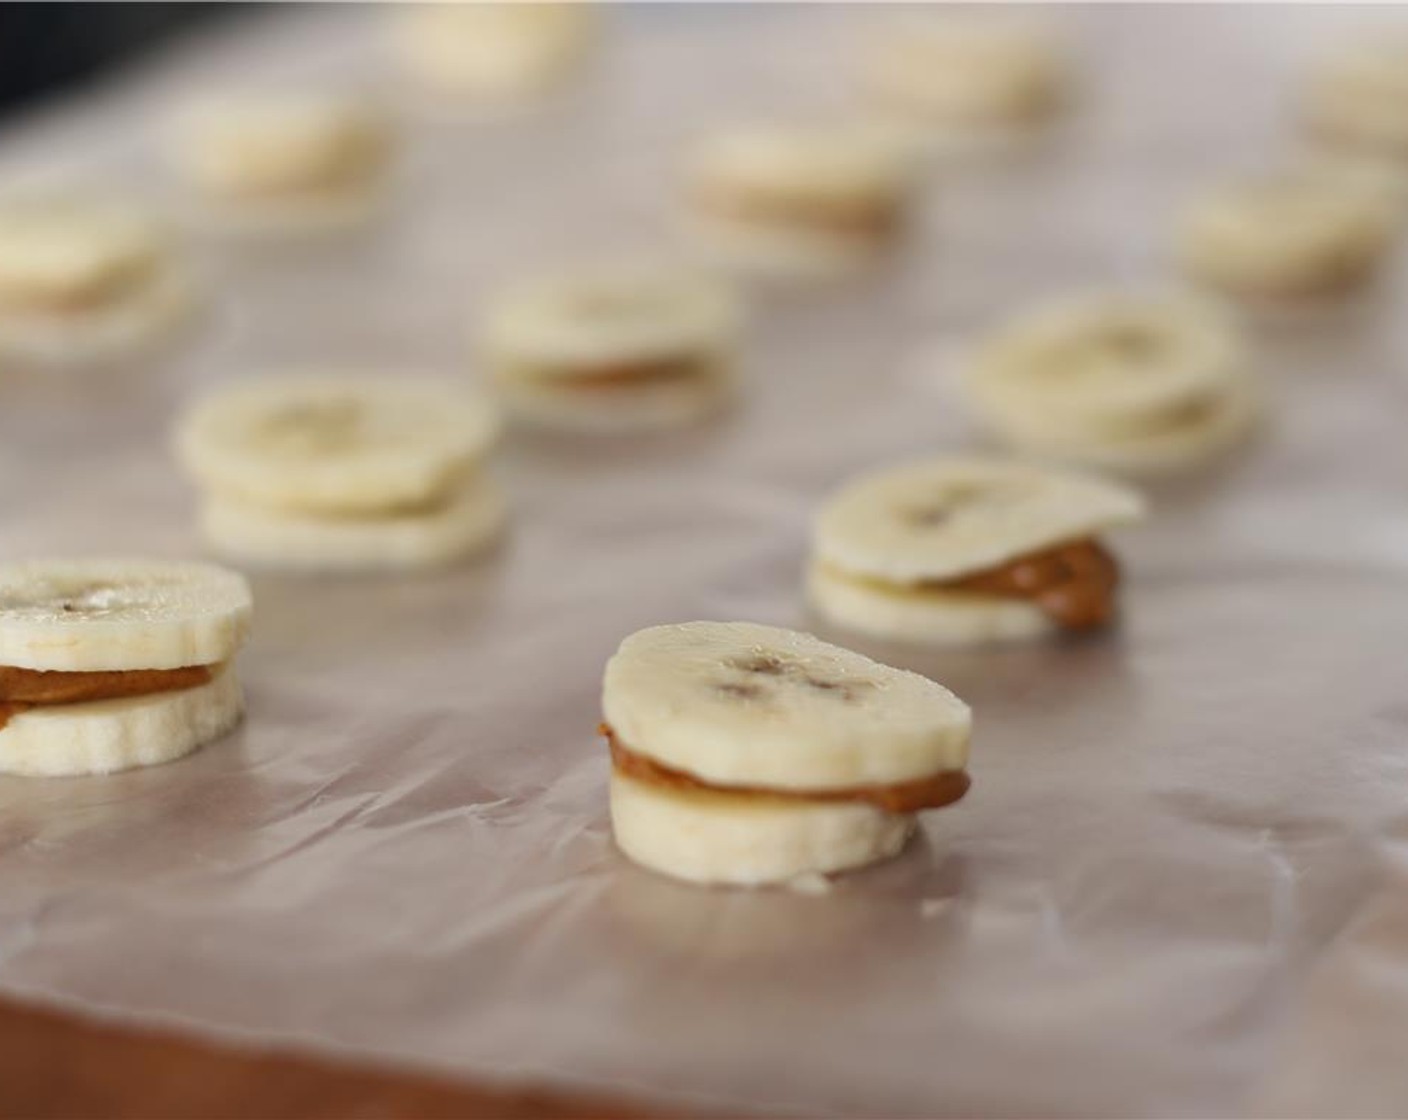 step 3 Top with another slice of banana. Place tray in freezer for half an hour. Eat immediately or put in a tupperware container for snacking!